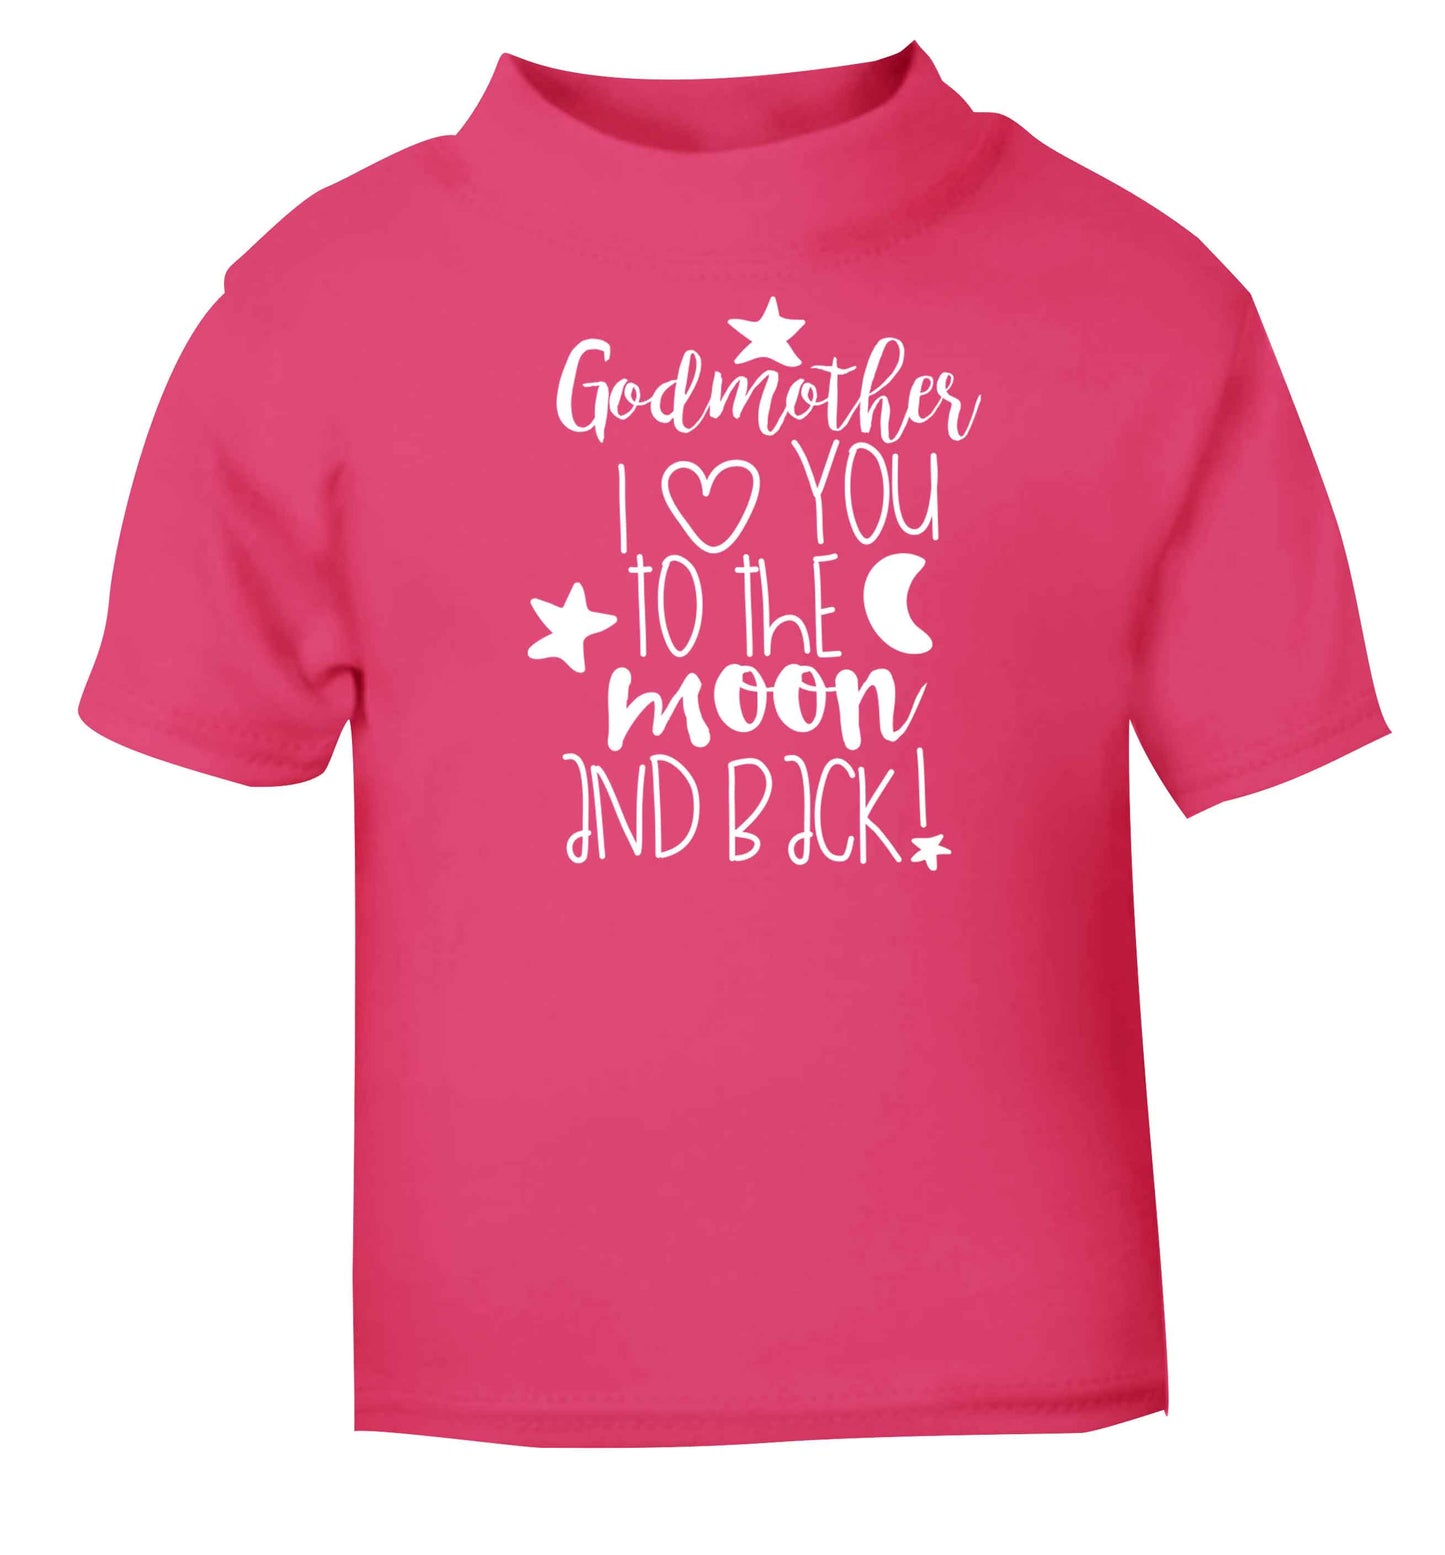 Godmother I love you to the moon and back pink baby toddler Tshirt 2 Years